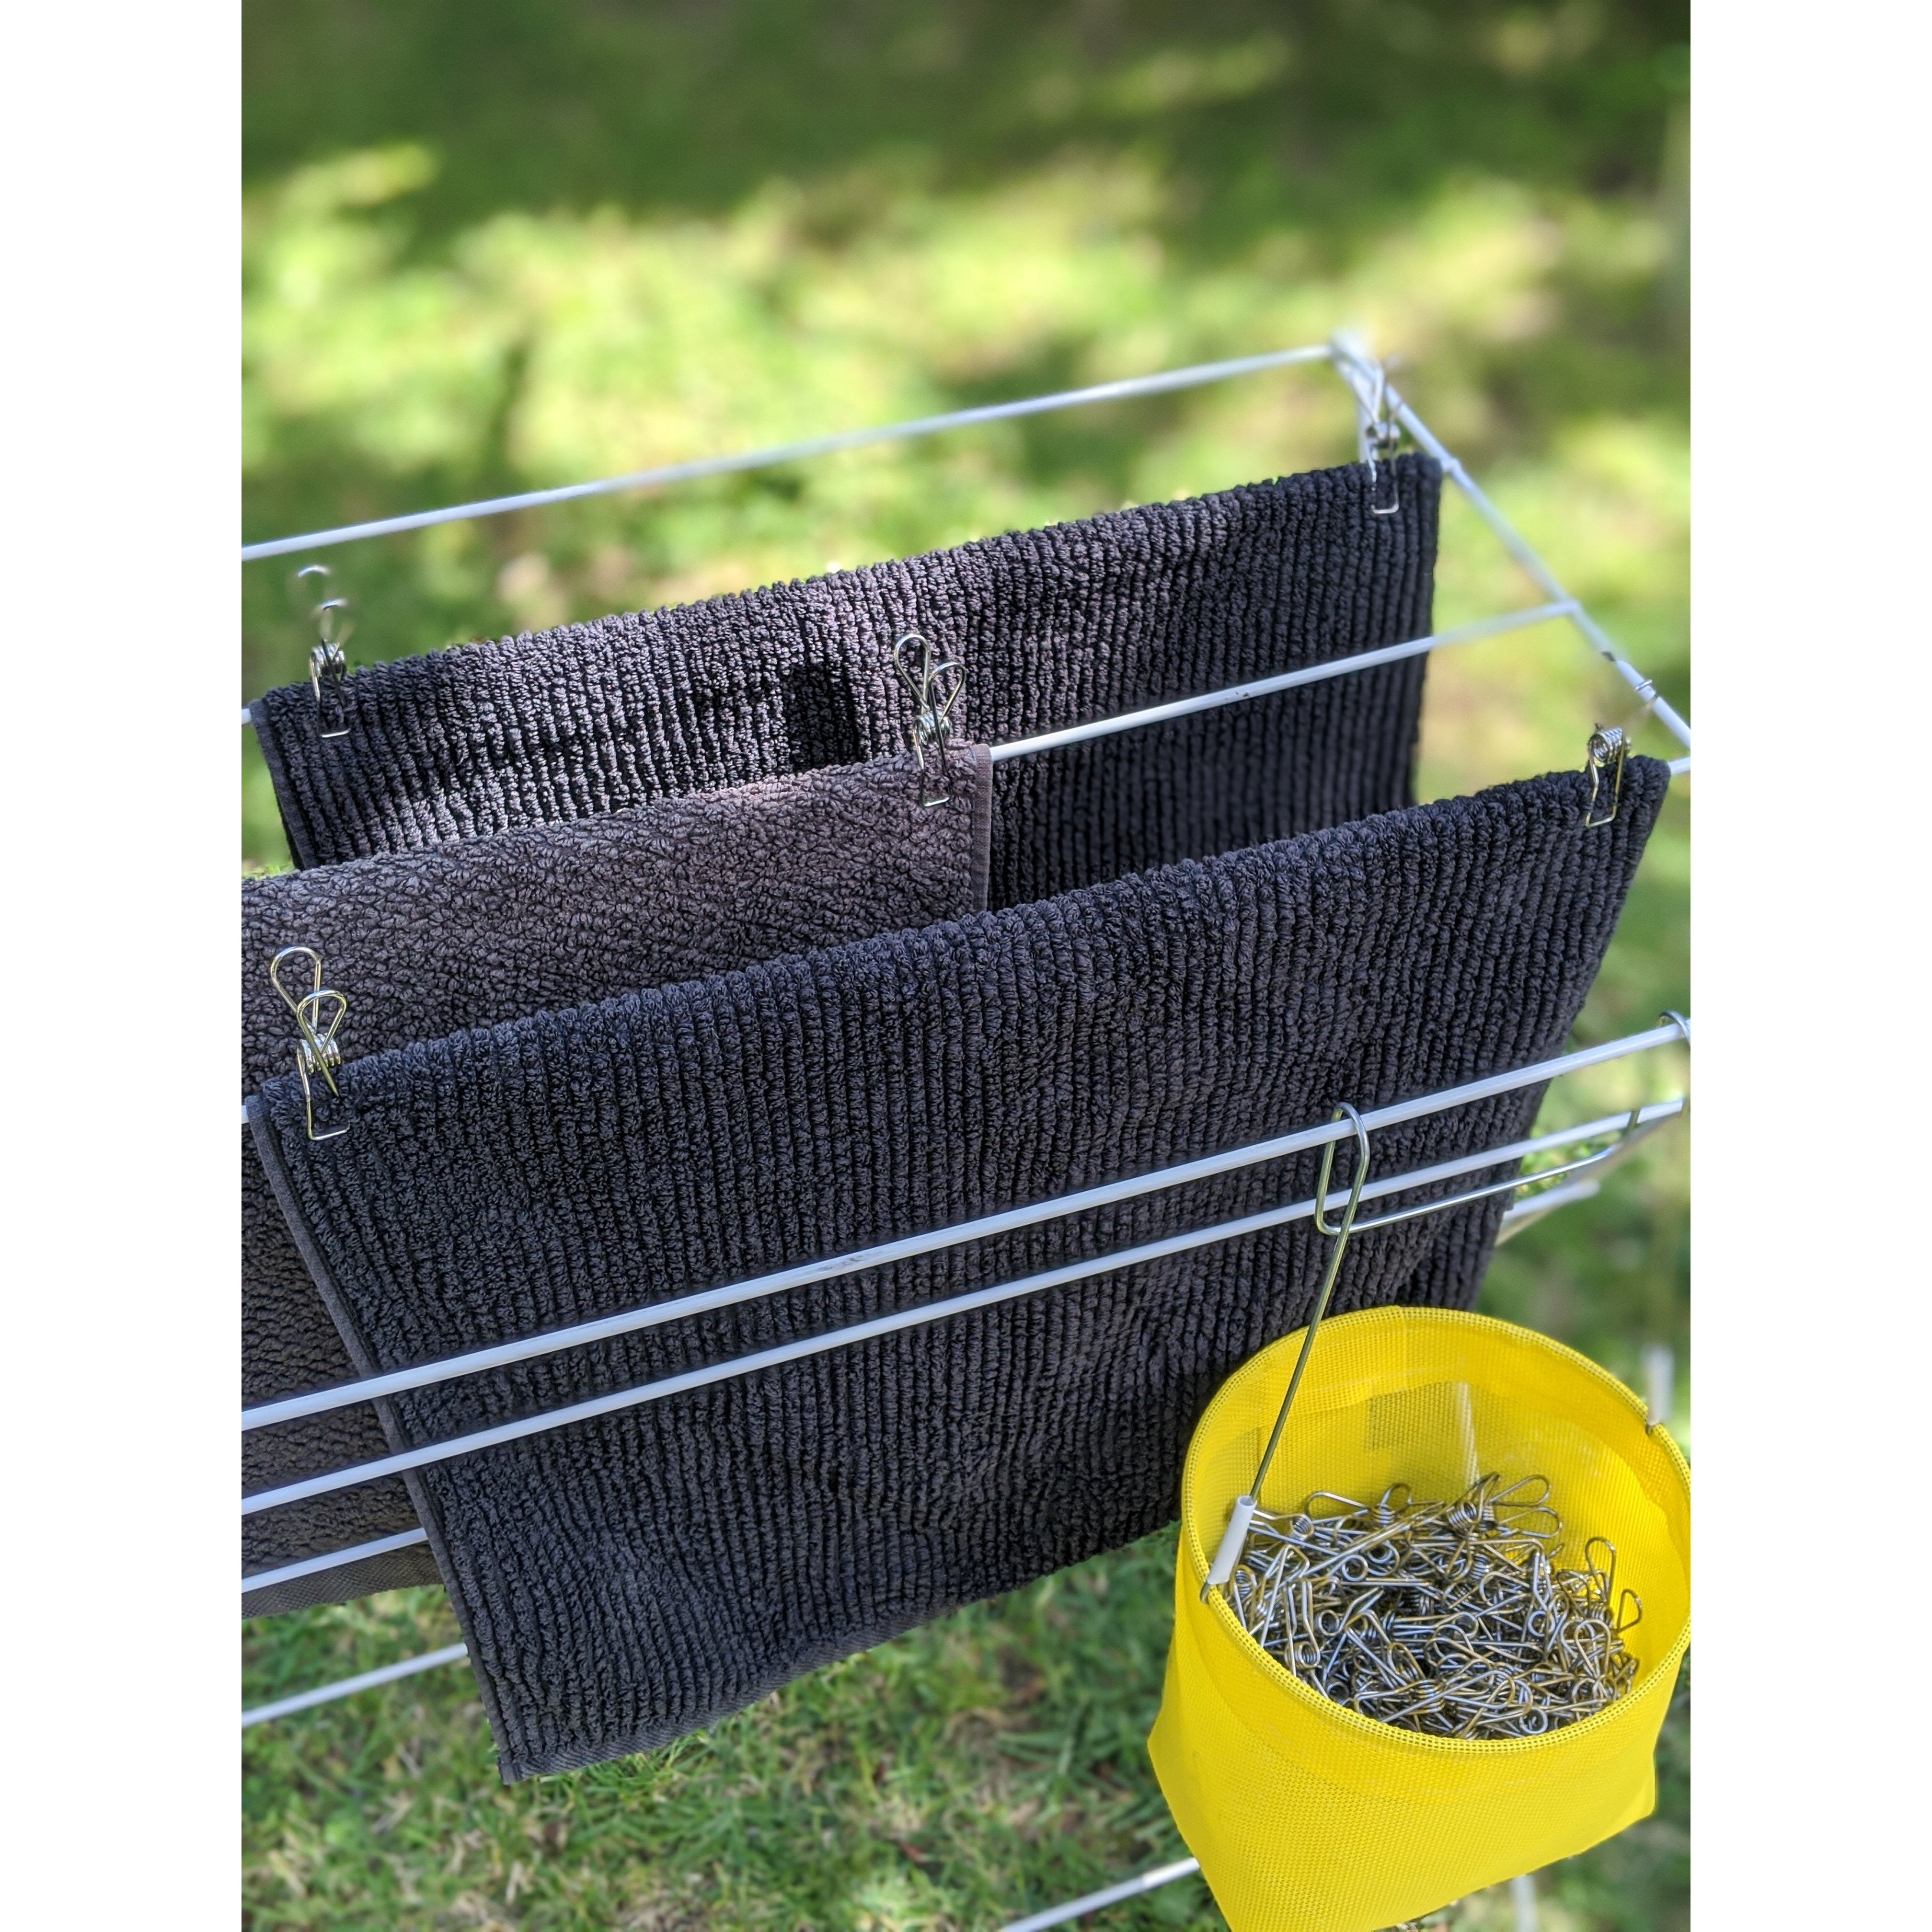 Peg basket for drying rack or trolley